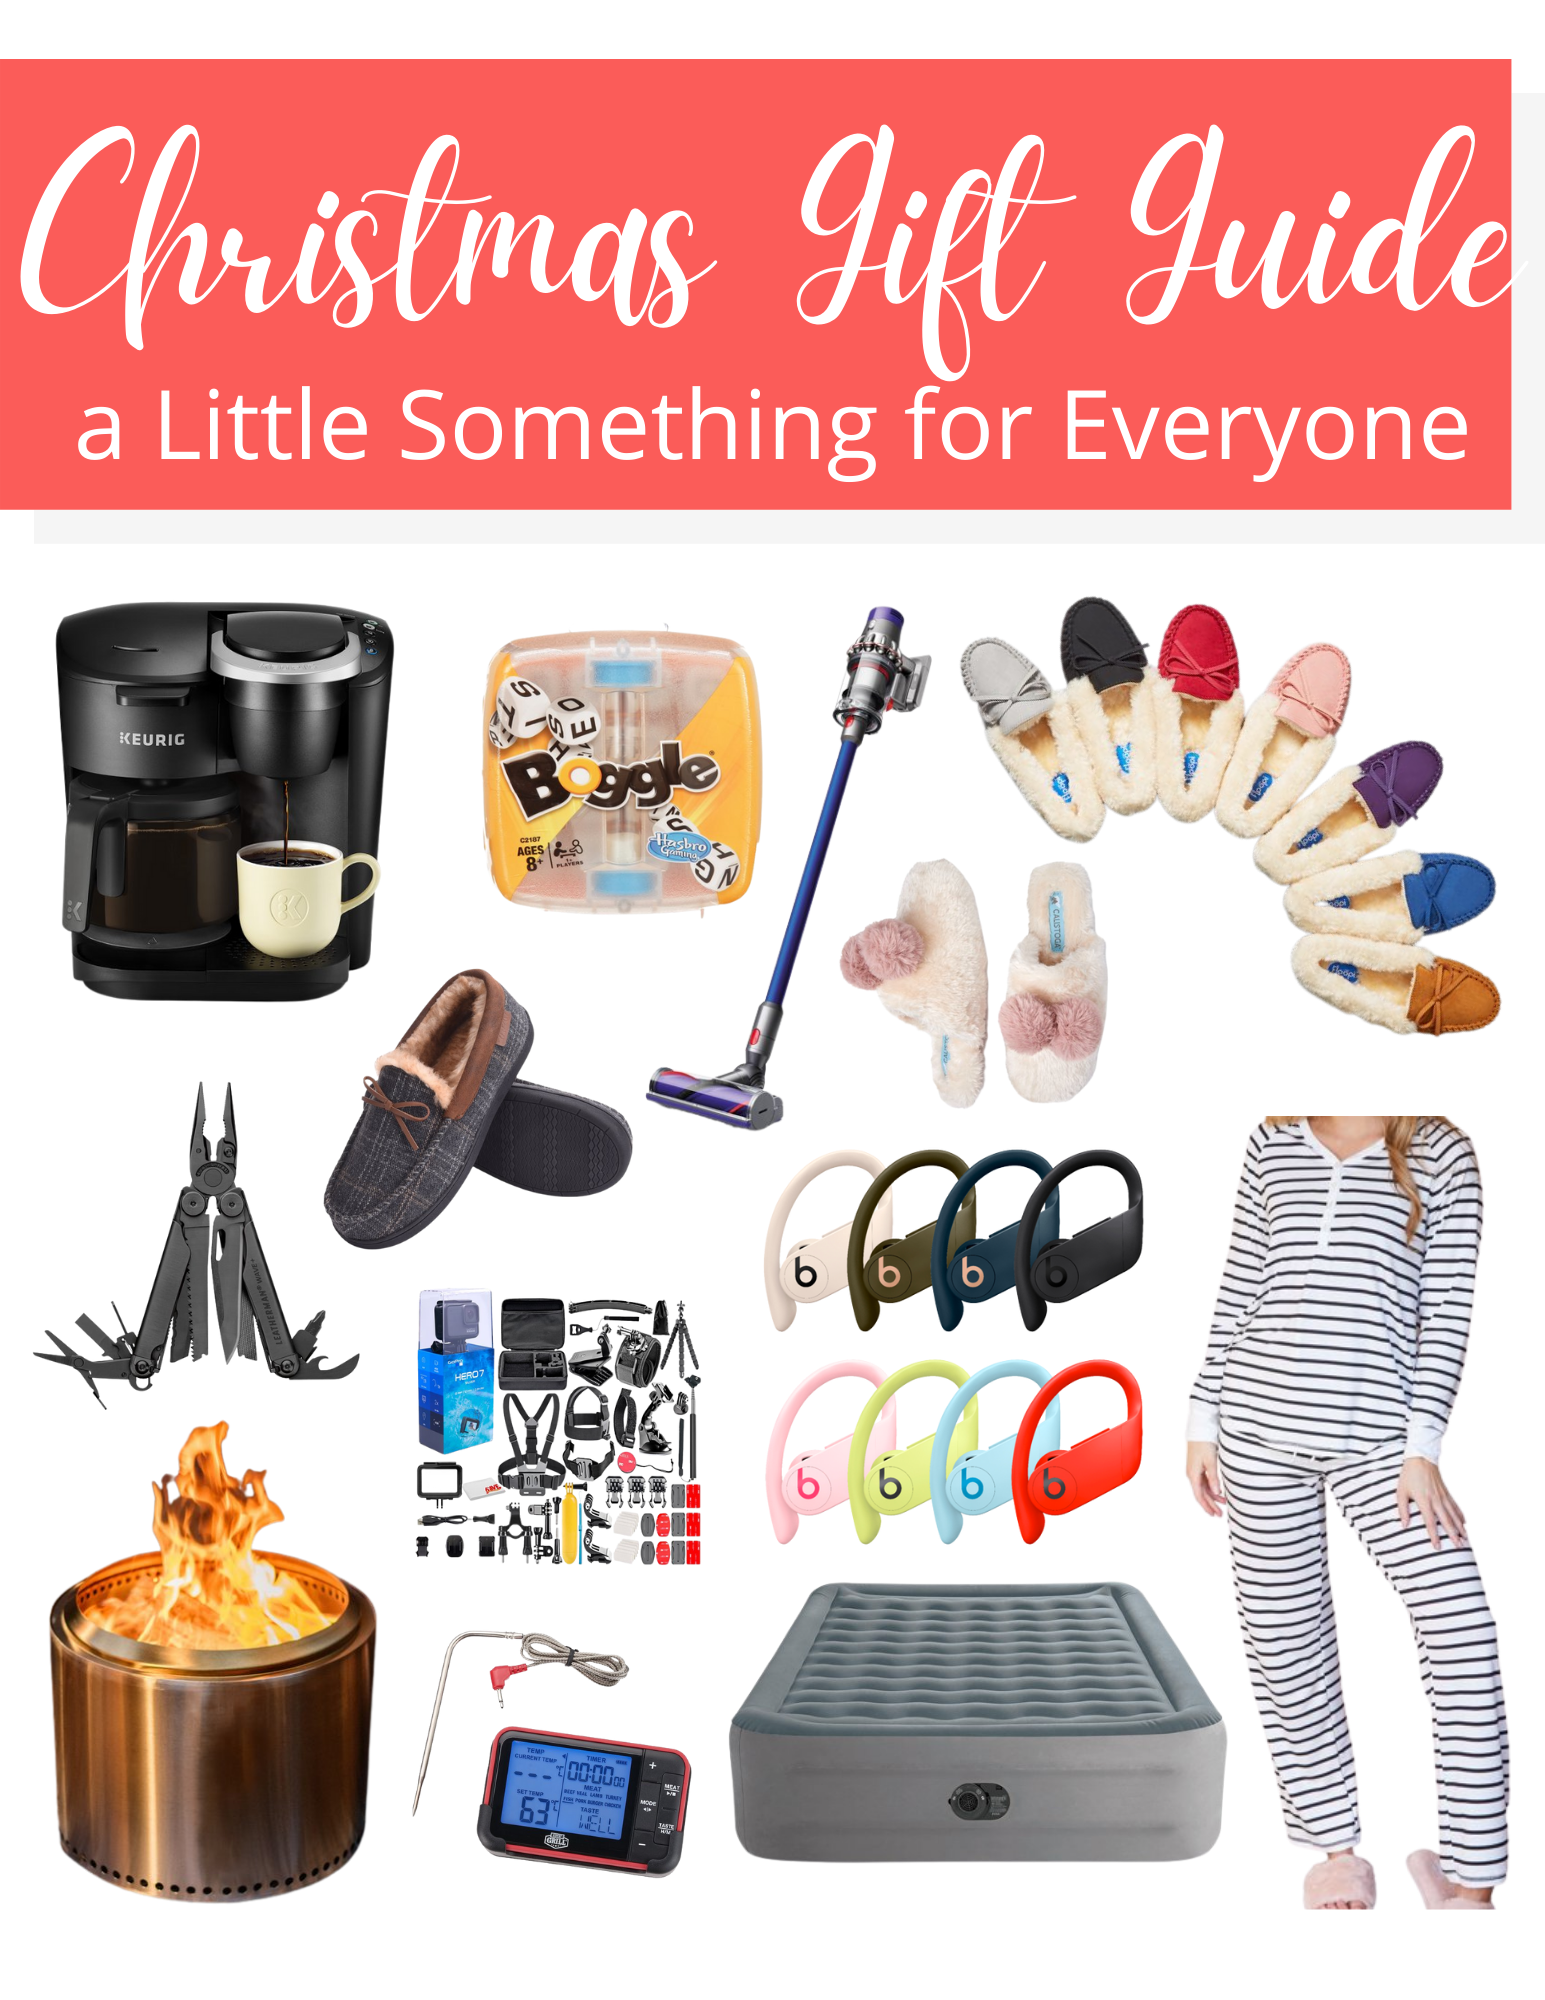 Christmas Gift Guide-A Little Something for Everyone, H. Prall